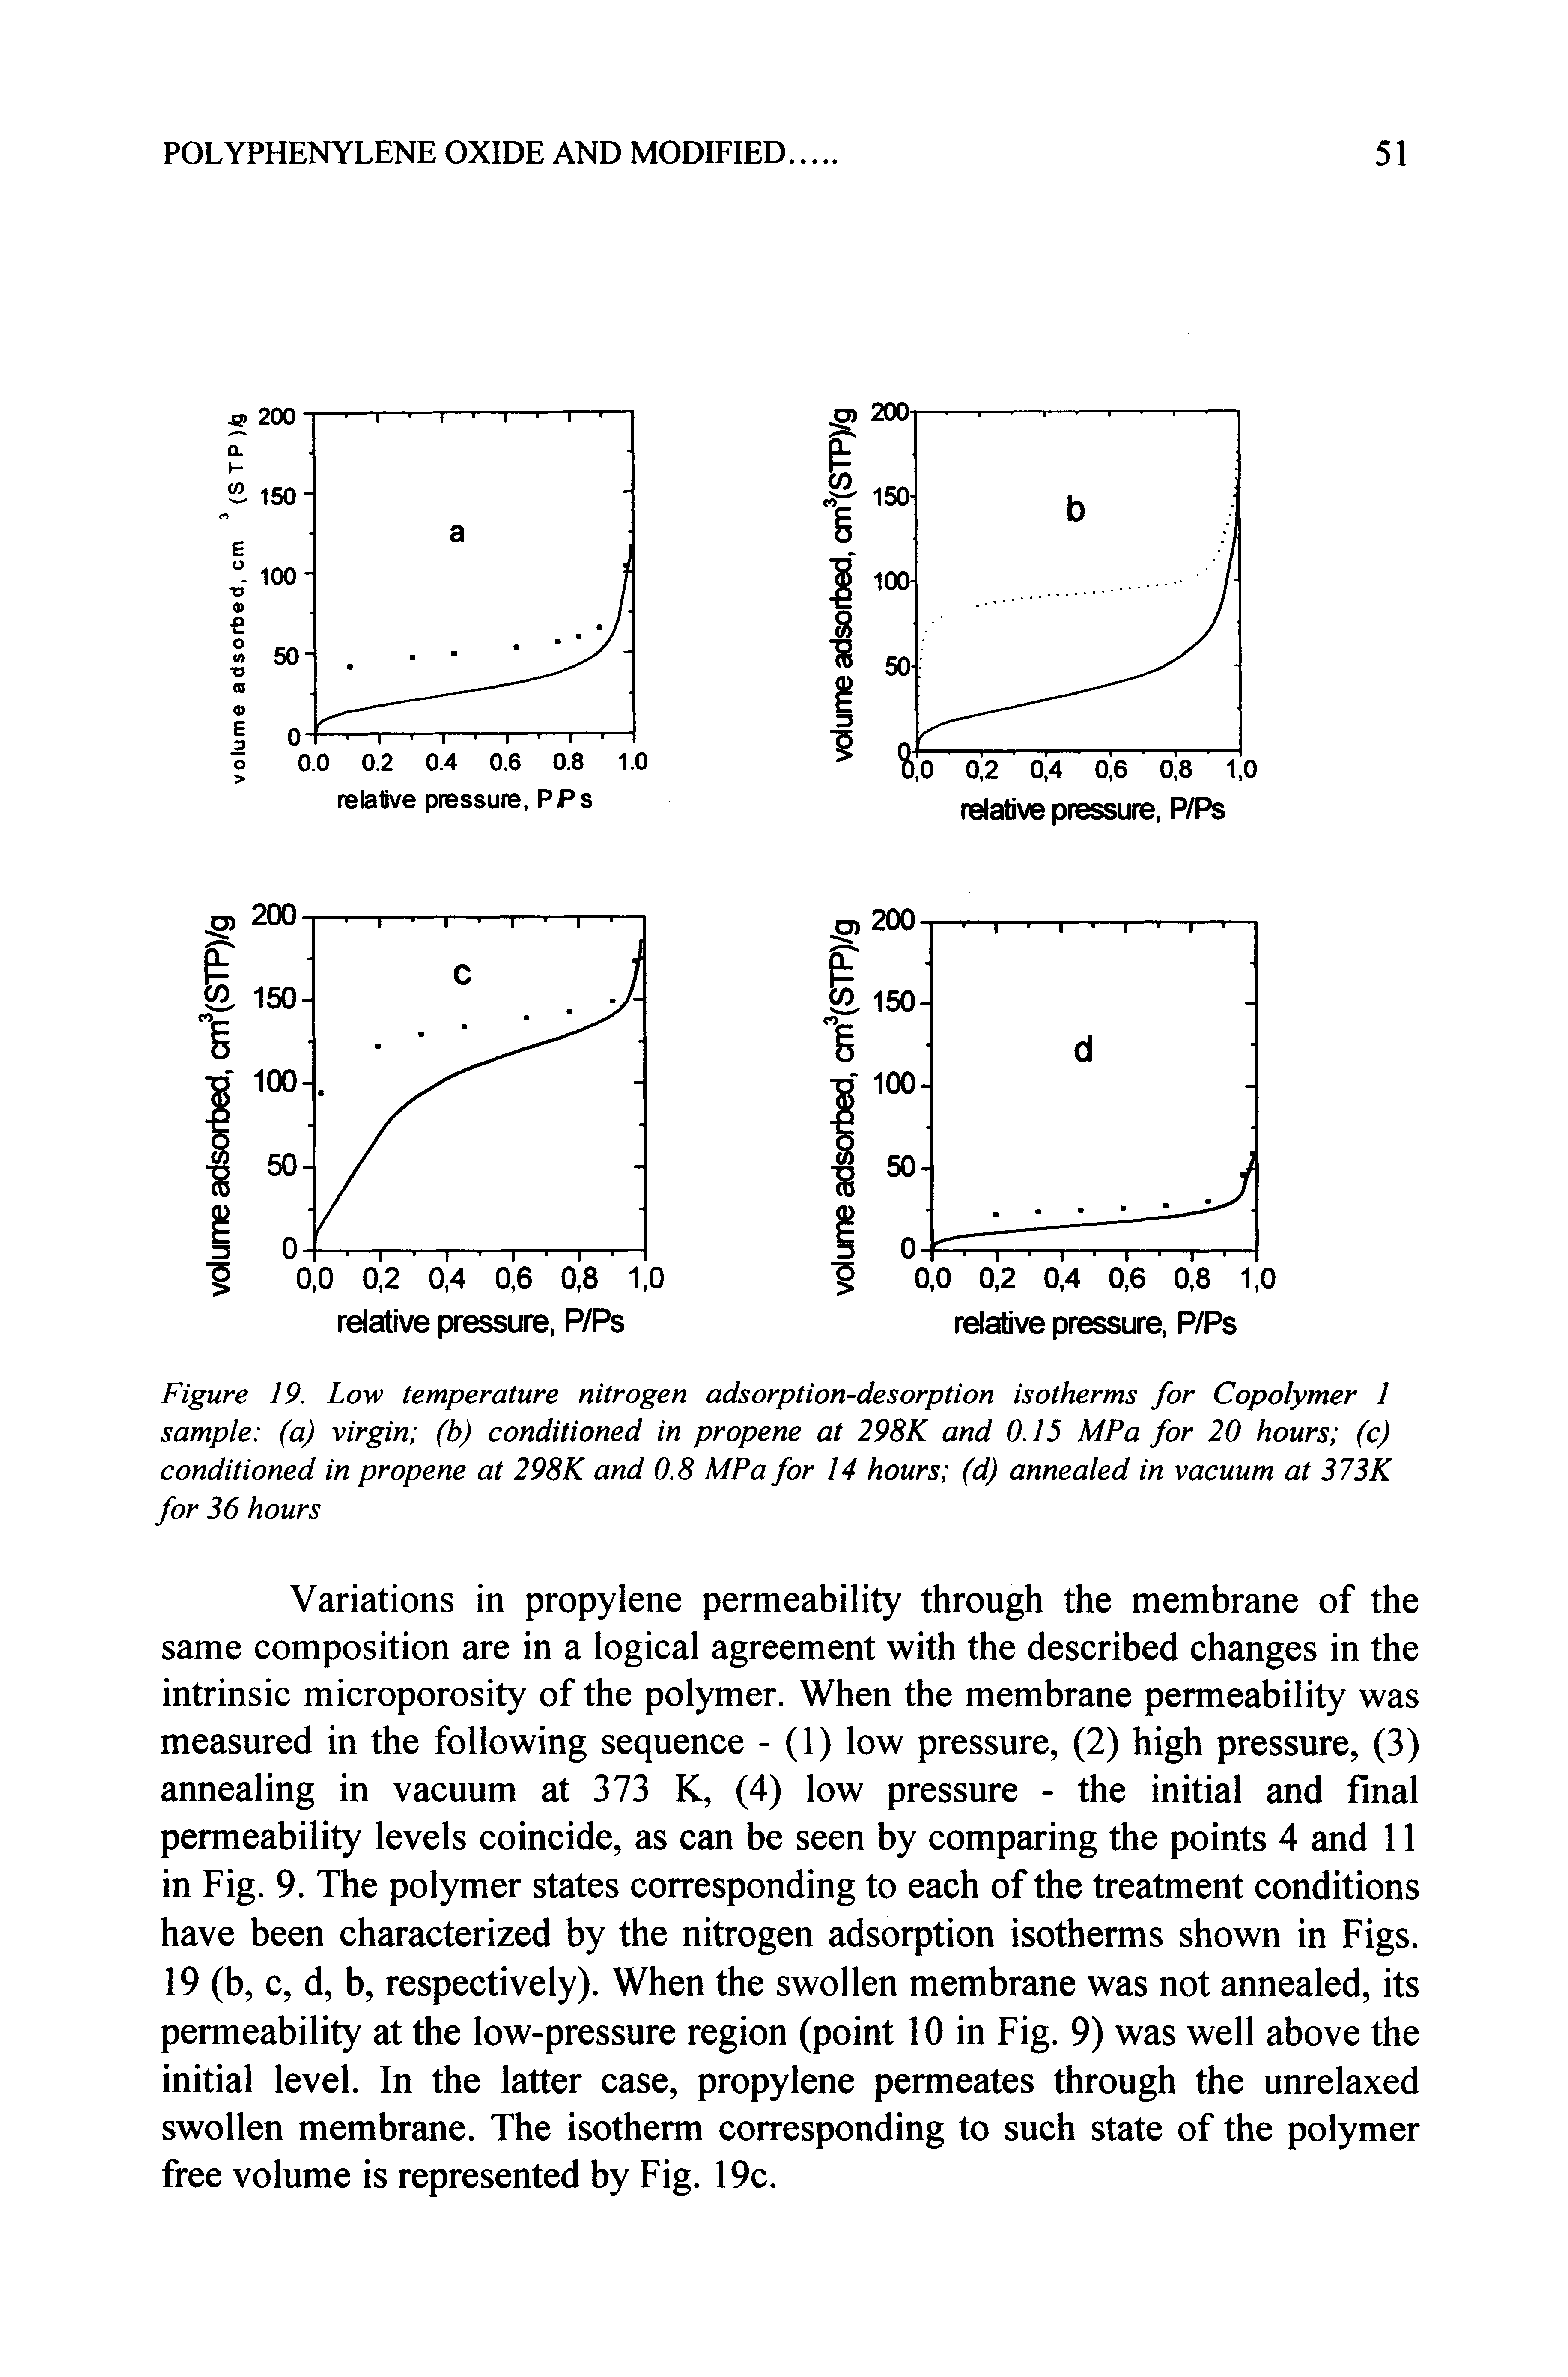 Figure 19. Low temperature nitrogen adsorption-desorption isotherms for Copolymer 1 sample (a) virgin (b) conditioned in propene at 298K and 0.15 MPa for 20 hours (c) conditioned in propene at 298K and 0.8 MPa for 14 hours (d) annealed in vacuum at 373K for 36 hours...